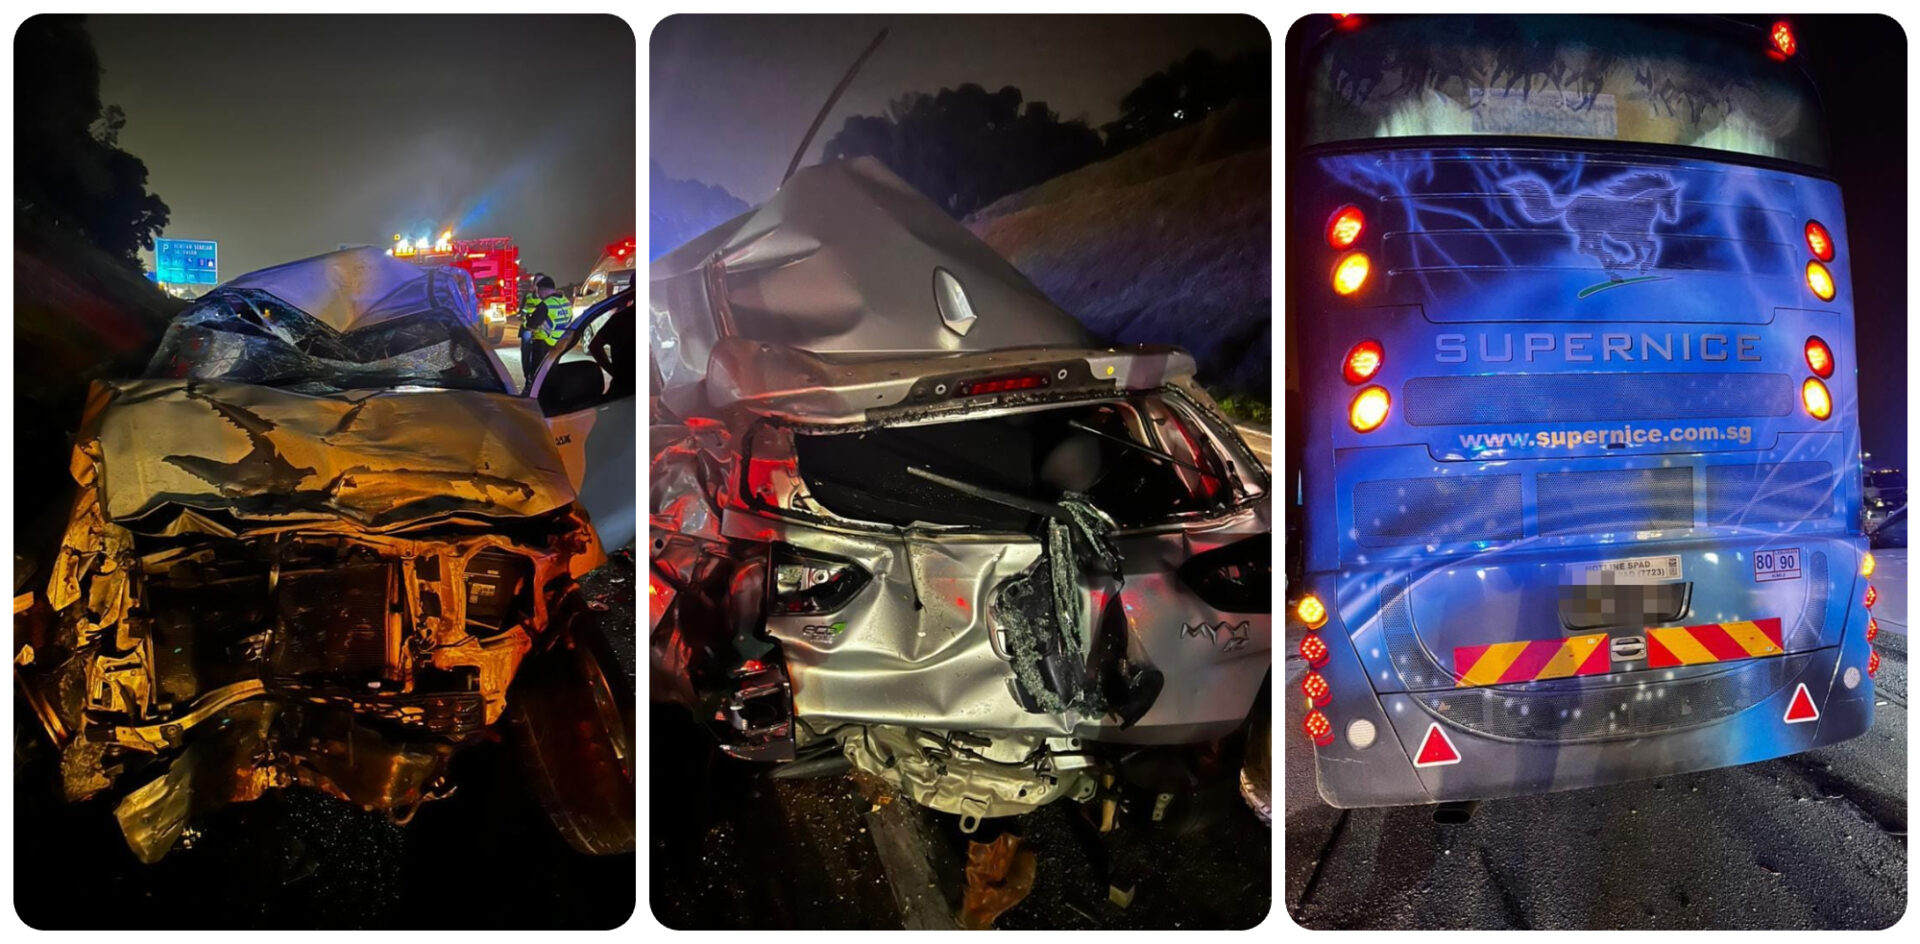 Speed kills: Honda Accord driver lost control, caused fatal seven-vehicle pile-up, police say